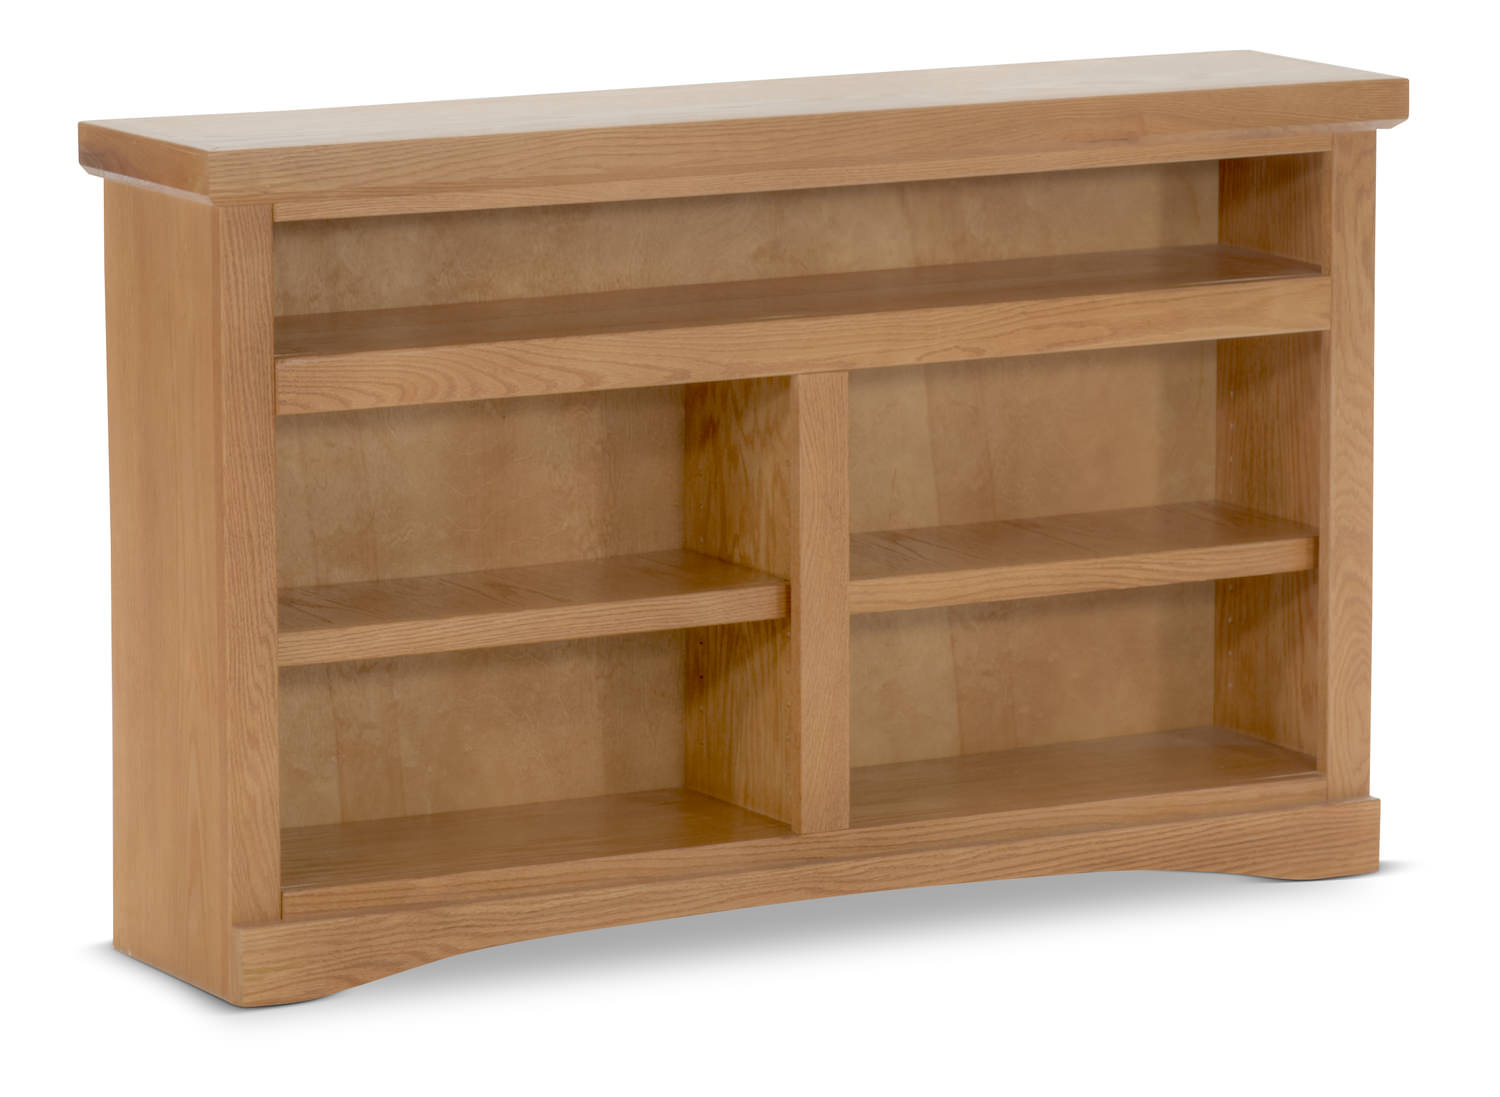 48 Wide Traditional Oak Bookcase By Direct Hom Furniture